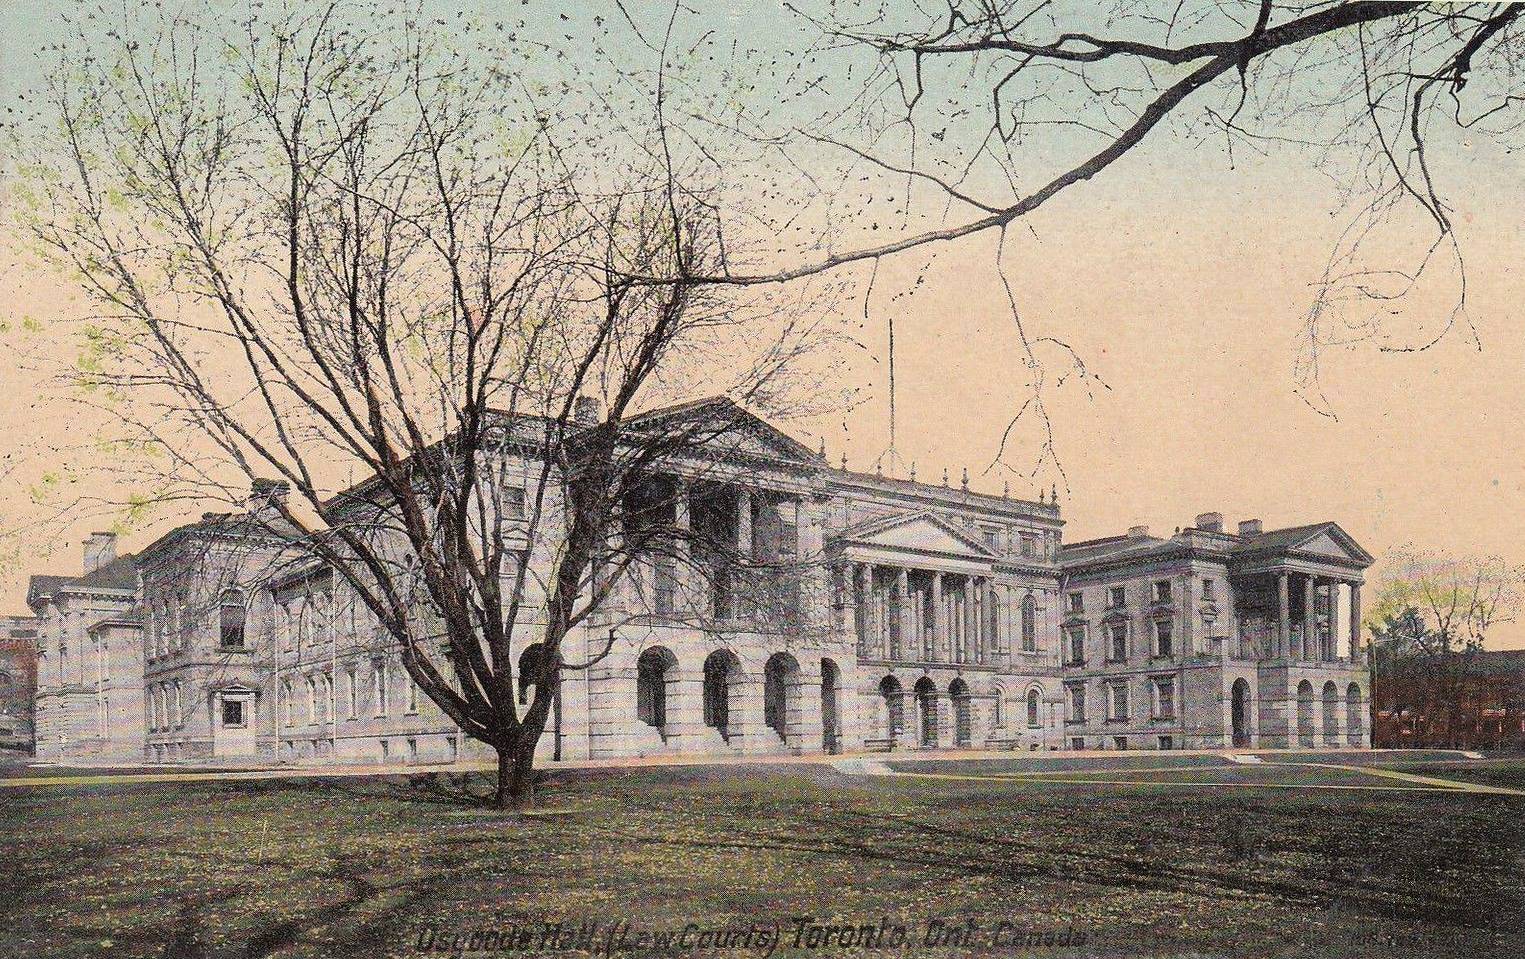 xx postcard - toronto - osgoode hall lawcourts - queen and university- tinted - c1910